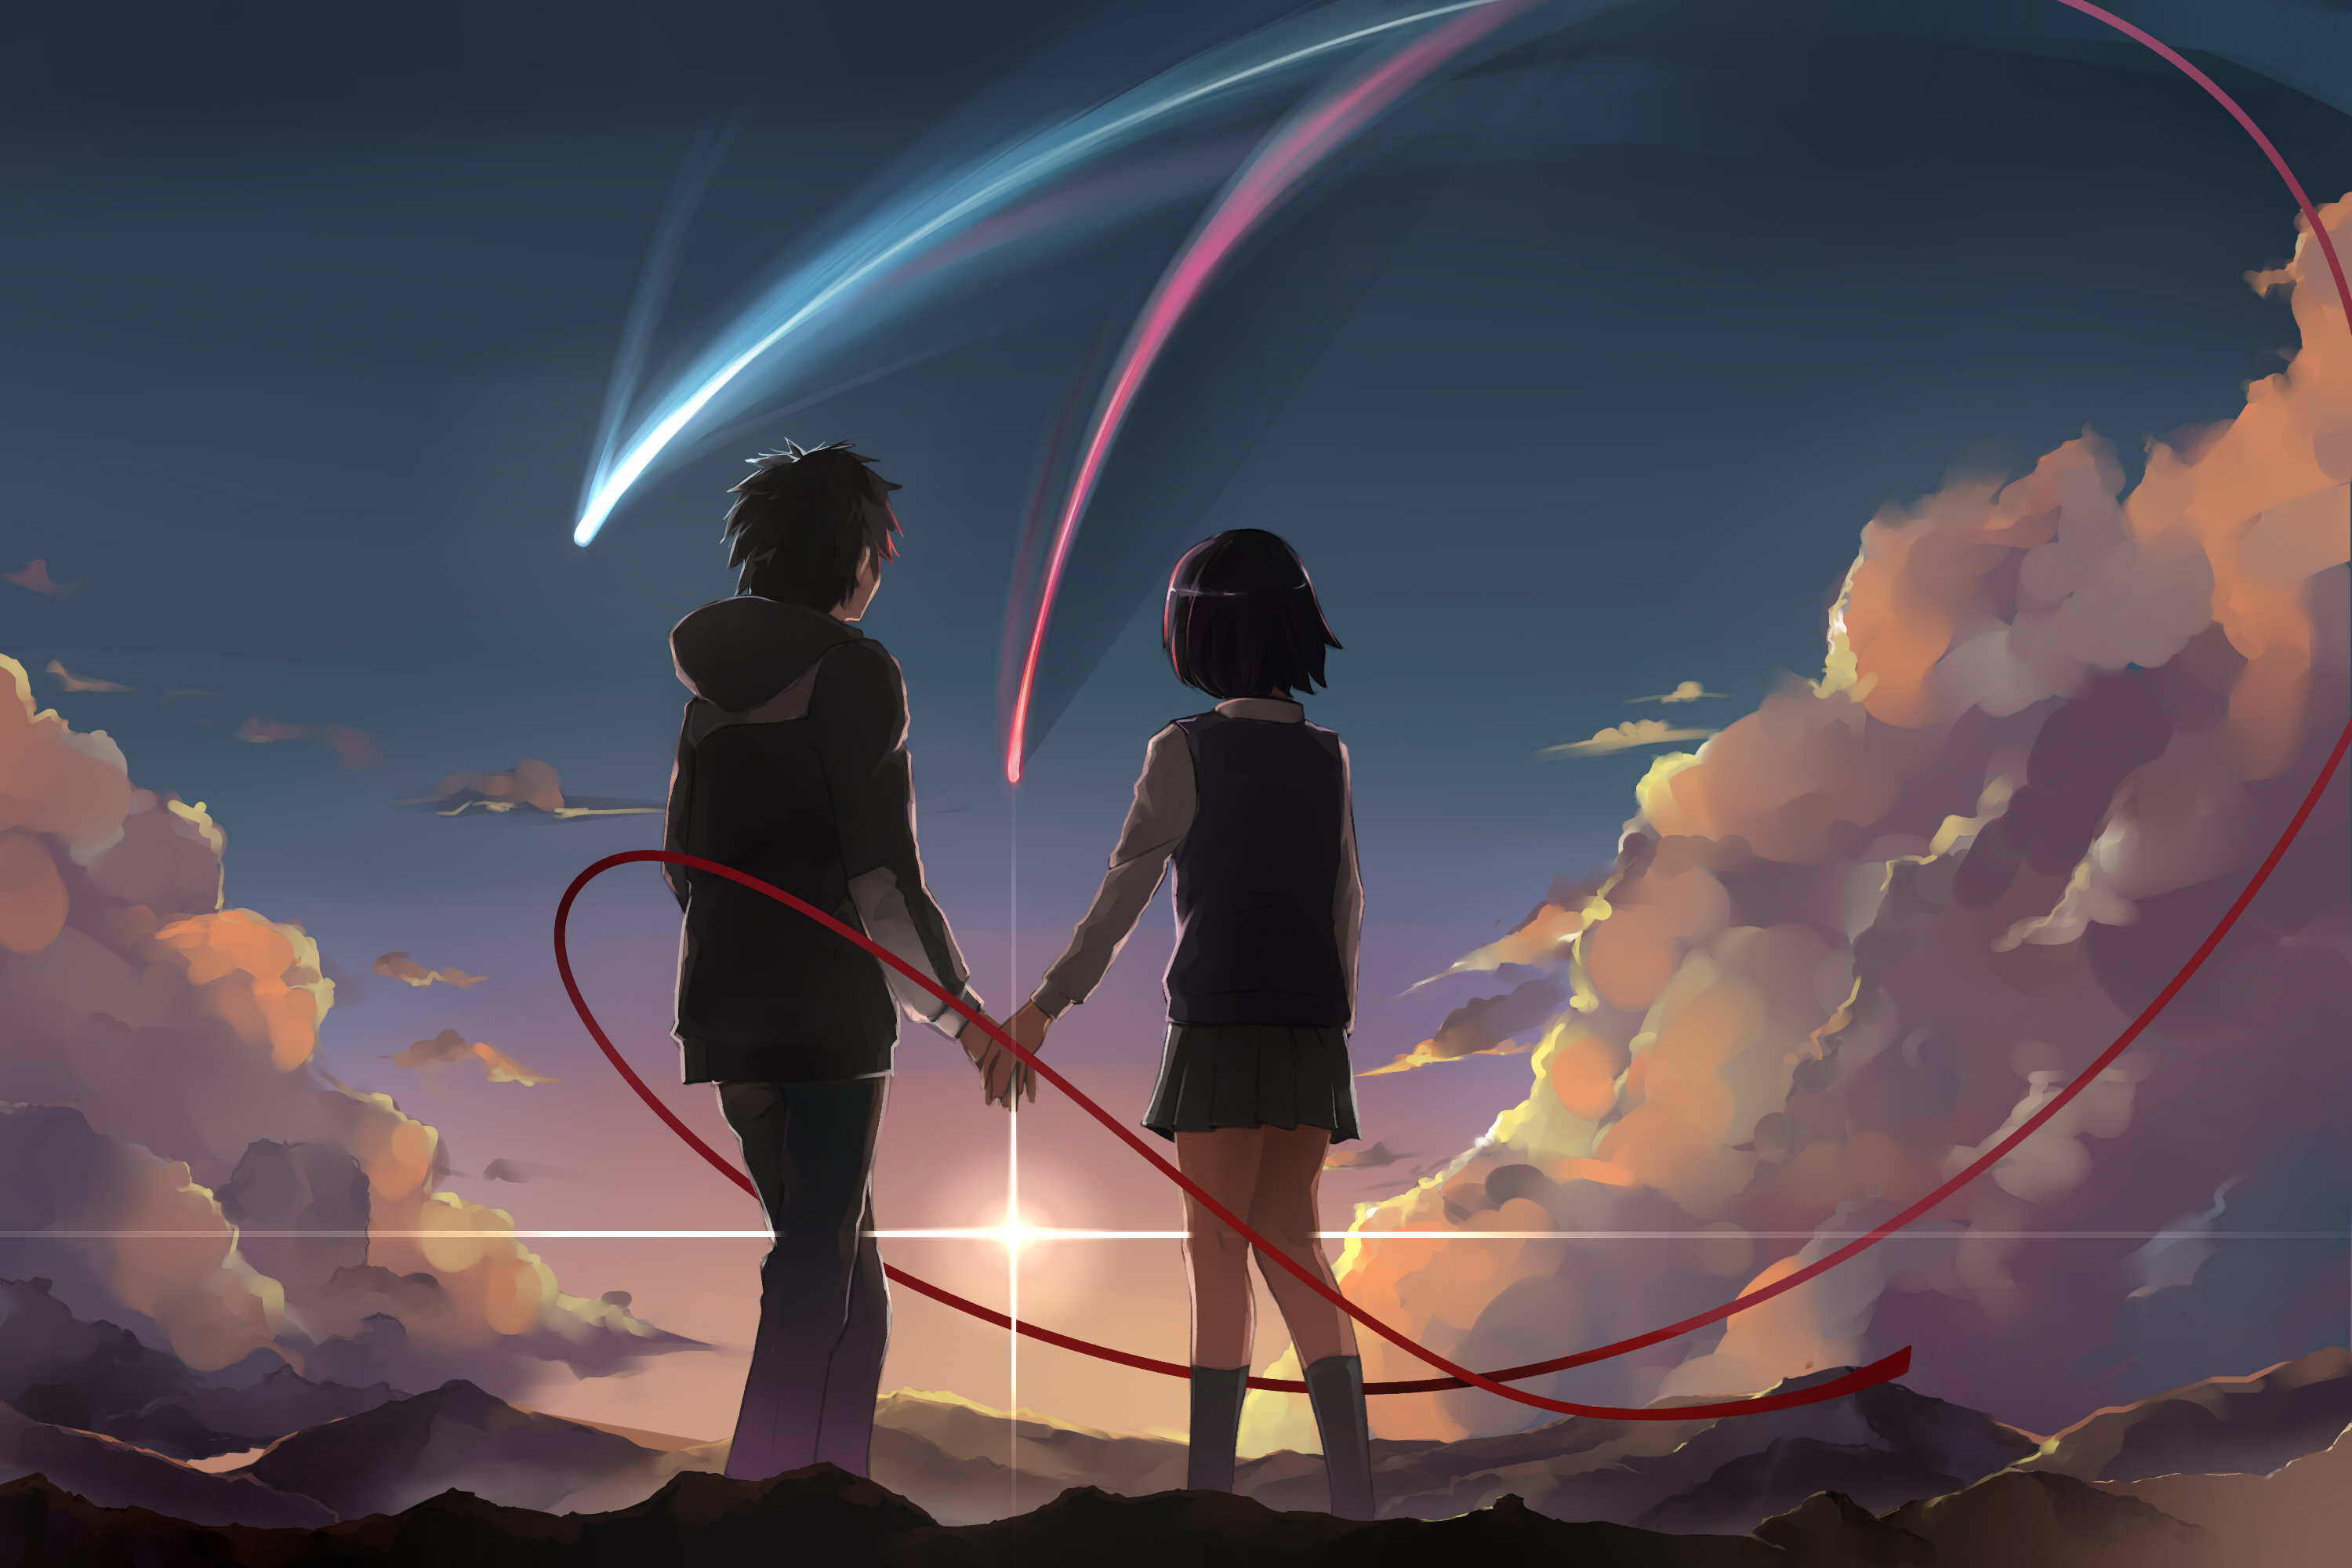 your name anime wallpaper,sky,cloud,atmosphere,meteorological phenomenon,photography